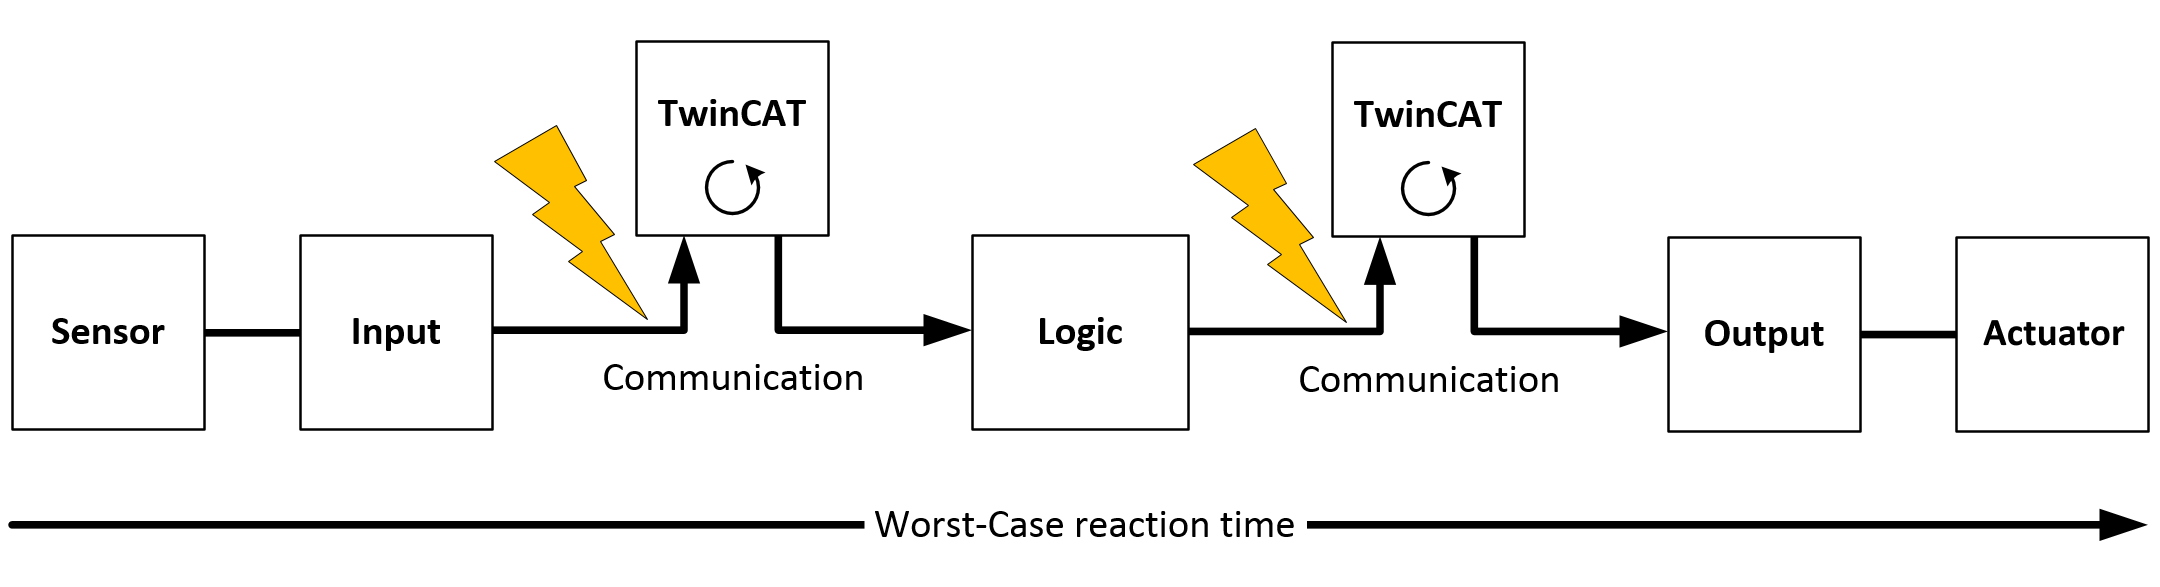 TwinSAFE reaction times 4: